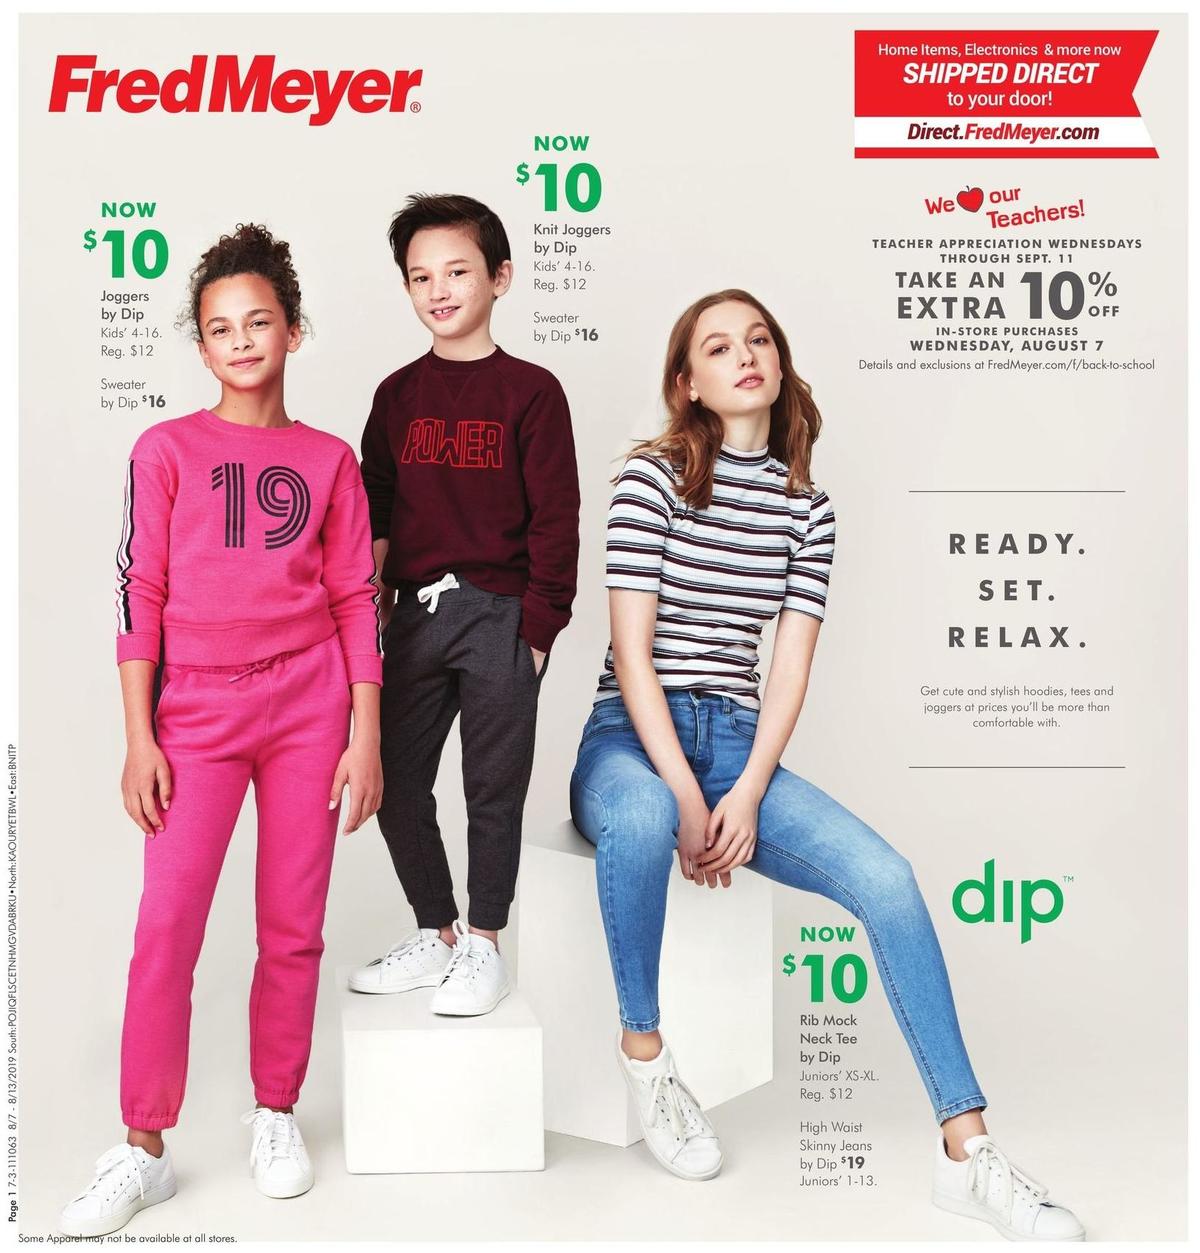 Fred Meyer General Merchandise Weekly Ad from August 7